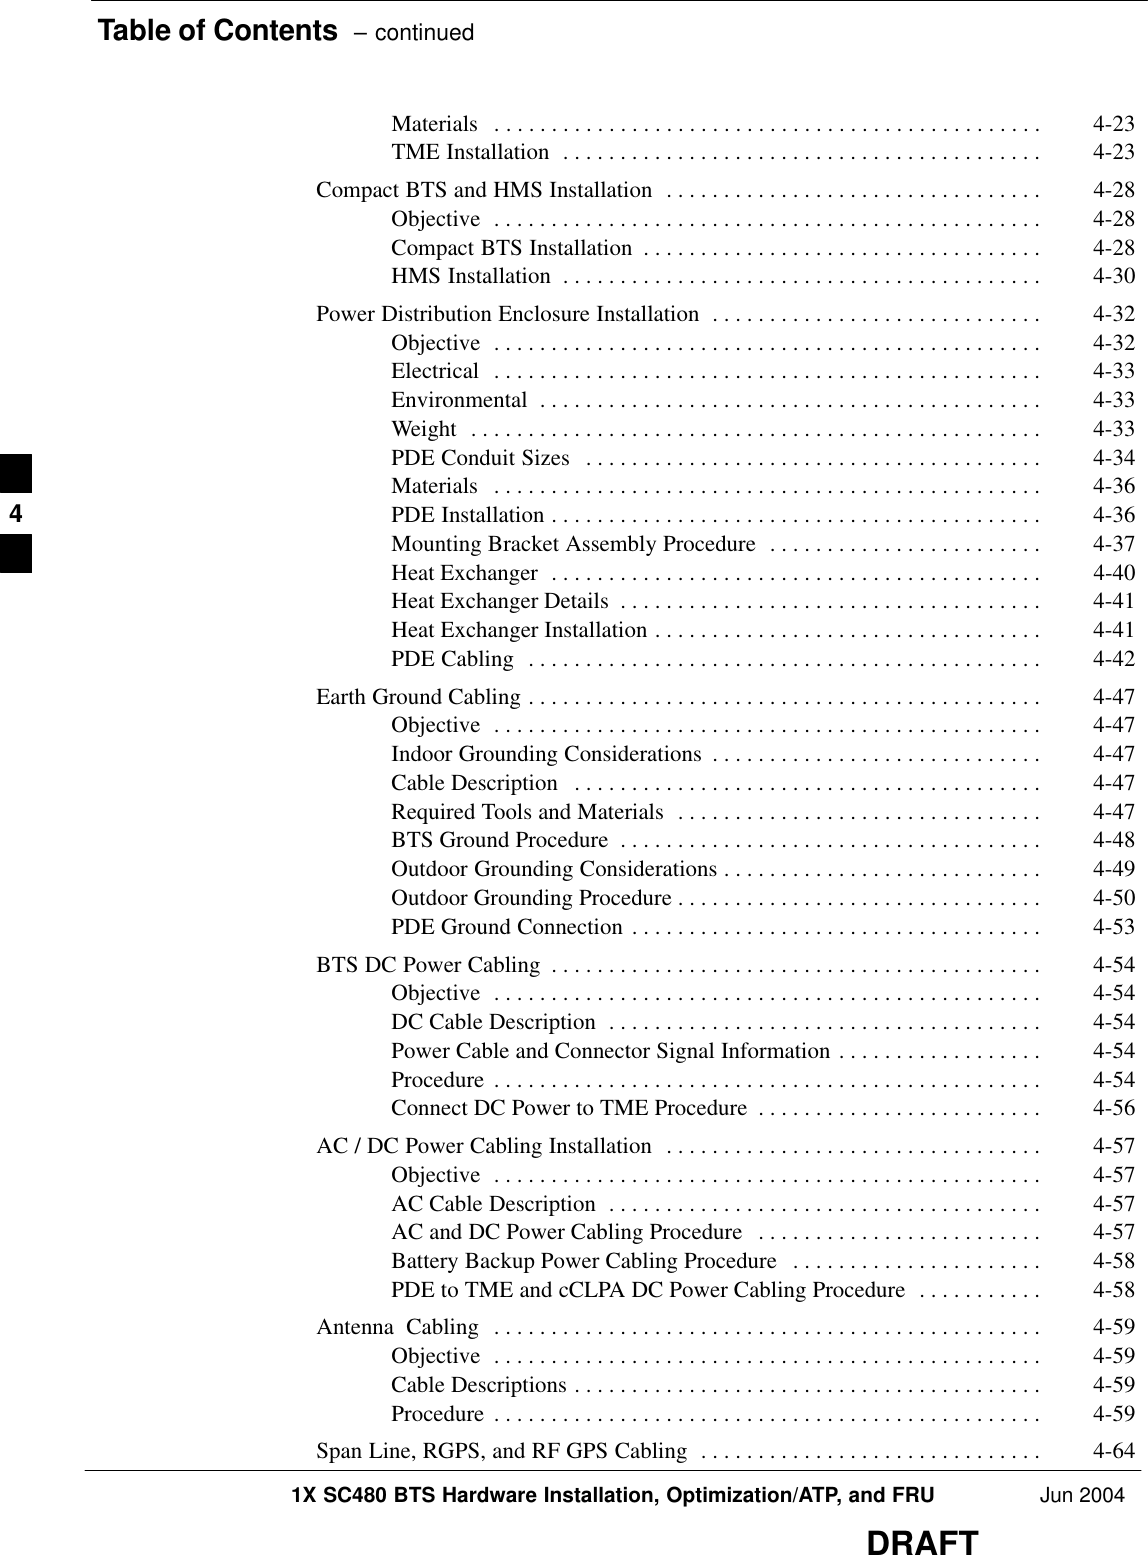 Table of Contents  – continued1X SC480 BTS Hardware Installation, Optimization/ATP, and FRU Jun 2004DRAFTMaterials 4-23 . . . . . . . . . . . . . . . . . . . . . . . . . . . . . . . . . . . . . . . . . . . . . . . . TME Installation 4-23 . . . . . . . . . . . . . . . . . . . . . . . . . . . . . . . . . . . . . . . . . . Compact BTS and HMS Installation 4-28 . . . . . . . . . . . . . . . . . . . . . . . . . . . . . . . . . Objective 4-28 . . . . . . . . . . . . . . . . . . . . . . . . . . . . . . . . . . . . . . . . . . . . . . . . Compact BTS Installation 4-28 . . . . . . . . . . . . . . . . . . . . . . . . . . . . . . . . . . . HMS Installation 4-30 . . . . . . . . . . . . . . . . . . . . . . . . . . . . . . . . . . . . . . . . . . Power Distribution Enclosure Installation 4-32 . . . . . . . . . . . . . . . . . . . . . . . . . . . . . Objective 4-32 . . . . . . . . . . . . . . . . . . . . . . . . . . . . . . . . . . . . . . . . . . . . . . . . Electrical 4-33 . . . . . . . . . . . . . . . . . . . . . . . . . . . . . . . . . . . . . . . . . . . . . . . . Environmental 4-33 . . . . . . . . . . . . . . . . . . . . . . . . . . . . . . . . . . . . . . . . . . . . Weight 4-33 . . . . . . . . . . . . . . . . . . . . . . . . . . . . . . . . . . . . . . . . . . . . . . . . . . PDE Conduit Sizes 4-34 . . . . . . . . . . . . . . . . . . . . . . . . . . . . . . . . . . . . . . . . Materials 4-36 . . . . . . . . . . . . . . . . . . . . . . . . . . . . . . . . . . . . . . . . . . . . . . . . PDE Installation 4-36 . . . . . . . . . . . . . . . . . . . . . . . . . . . . . . . . . . . . . . . . . . . Mounting Bracket Assembly Procedure 4-37 . . . . . . . . . . . . . . . . . . . . . . . . Heat Exchanger 4-40 . . . . . . . . . . . . . . . . . . . . . . . . . . . . . . . . . . . . . . . . . . . Heat Exchanger Details 4-41 . . . . . . . . . . . . . . . . . . . . . . . . . . . . . . . . . . . . . Heat Exchanger Installation 4-41 . . . . . . . . . . . . . . . . . . . . . . . . . . . . . . . . . . PDE Cabling 4-42 . . . . . . . . . . . . . . . . . . . . . . . . . . . . . . . . . . . . . . . . . . . . . Earth Ground Cabling 4-47 . . . . . . . . . . . . . . . . . . . . . . . . . . . . . . . . . . . . . . . . . . . . . Objective 4-47 . . . . . . . . . . . . . . . . . . . . . . . . . . . . . . . . . . . . . . . . . . . . . . . . Indoor Grounding Considerations 4-47 . . . . . . . . . . . . . . . . . . . . . . . . . . . . . Cable Description 4-47 . . . . . . . . . . . . . . . . . . . . . . . . . . . . . . . . . . . . . . . . . Required Tools and Materials 4-47 . . . . . . . . . . . . . . . . . . . . . . . . . . . . . . . . BTS Ground Procedure 4-48 . . . . . . . . . . . . . . . . . . . . . . . . . . . . . . . . . . . . . Outdoor Grounding Considerations 4-49 . . . . . . . . . . . . . . . . . . . . . . . . . . . . Outdoor Grounding Procedure 4-50 . . . . . . . . . . . . . . . . . . . . . . . . . . . . . . . . PDE Ground Connection 4-53 . . . . . . . . . . . . . . . . . . . . . . . . . . . . . . . . . . . . BTS DC Power Cabling 4-54 . . . . . . . . . . . . . . . . . . . . . . . . . . . . . . . . . . . . . . . . . . . Objective 4-54 . . . . . . . . . . . . . . . . . . . . . . . . . . . . . . . . . . . . . . . . . . . . . . . . DC Cable Description 4-54 . . . . . . . . . . . . . . . . . . . . . . . . . . . . . . . . . . . . . . Power Cable and Connector Signal Information 4-54 . . . . . . . . . . . . . . . . . . Procedure 4-54 . . . . . . . . . . . . . . . . . . . . . . . . . . . . . . . . . . . . . . . . . . . . . . . . Connect DC Power to TME Procedure 4-56 . . . . . . . . . . . . . . . . . . . . . . . . . AC / DC Power Cabling Installation 4-57 . . . . . . . . . . . . . . . . . . . . . . . . . . . . . . . . . Objective 4-57 . . . . . . . . . . . . . . . . . . . . . . . . . . . . . . . . . . . . . . . . . . . . . . . . AC Cable Description 4-57 . . . . . . . . . . . . . . . . . . . . . . . . . . . . . . . . . . . . . . AC and DC Power Cabling Procedure 4-57 . . . . . . . . . . . . . . . . . . . . . . . . . Battery Backup Power Cabling Procedure 4-58 . . . . . . . . . . . . . . . . . . . . . . PDE to TME and cCLPA DC Power Cabling Procedure 4-58 . . . . . . . . . . . Antenna  Cabling 4-59 . . . . . . . . . . . . . . . . . . . . . . . . . . . . . . . . . . . . . . . . . . . . . . . . Objective 4-59 . . . . . . . . . . . . . . . . . . . . . . . . . . . . . . . . . . . . . . . . . . . . . . . . Cable Descriptions 4-59 . . . . . . . . . . . . . . . . . . . . . . . . . . . . . . . . . . . . . . . . . Procedure 4-59 . . . . . . . . . . . . . . . . . . . . . . . . . . . . . . . . . . . . . . . . . . . . . . . . Span Line, RGPS, and RF GPS Cabling 4-64 . . . . . . . . . . . . . . . . . . . . . . . . . . . . . . 4